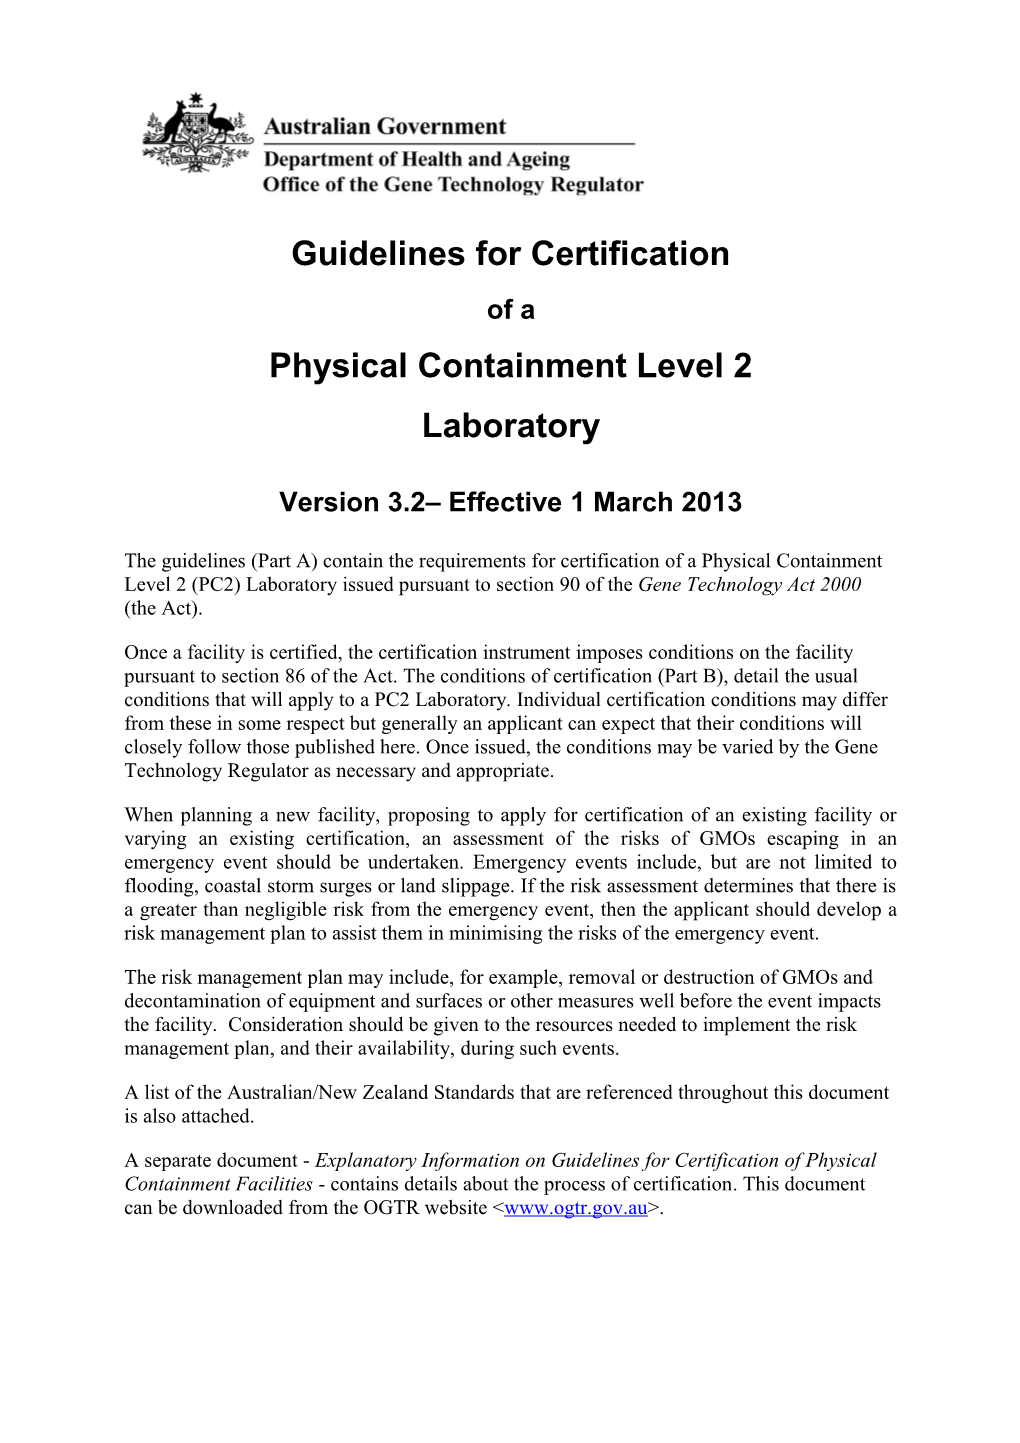 Guidelines for Certification of a PC2 Laboratory